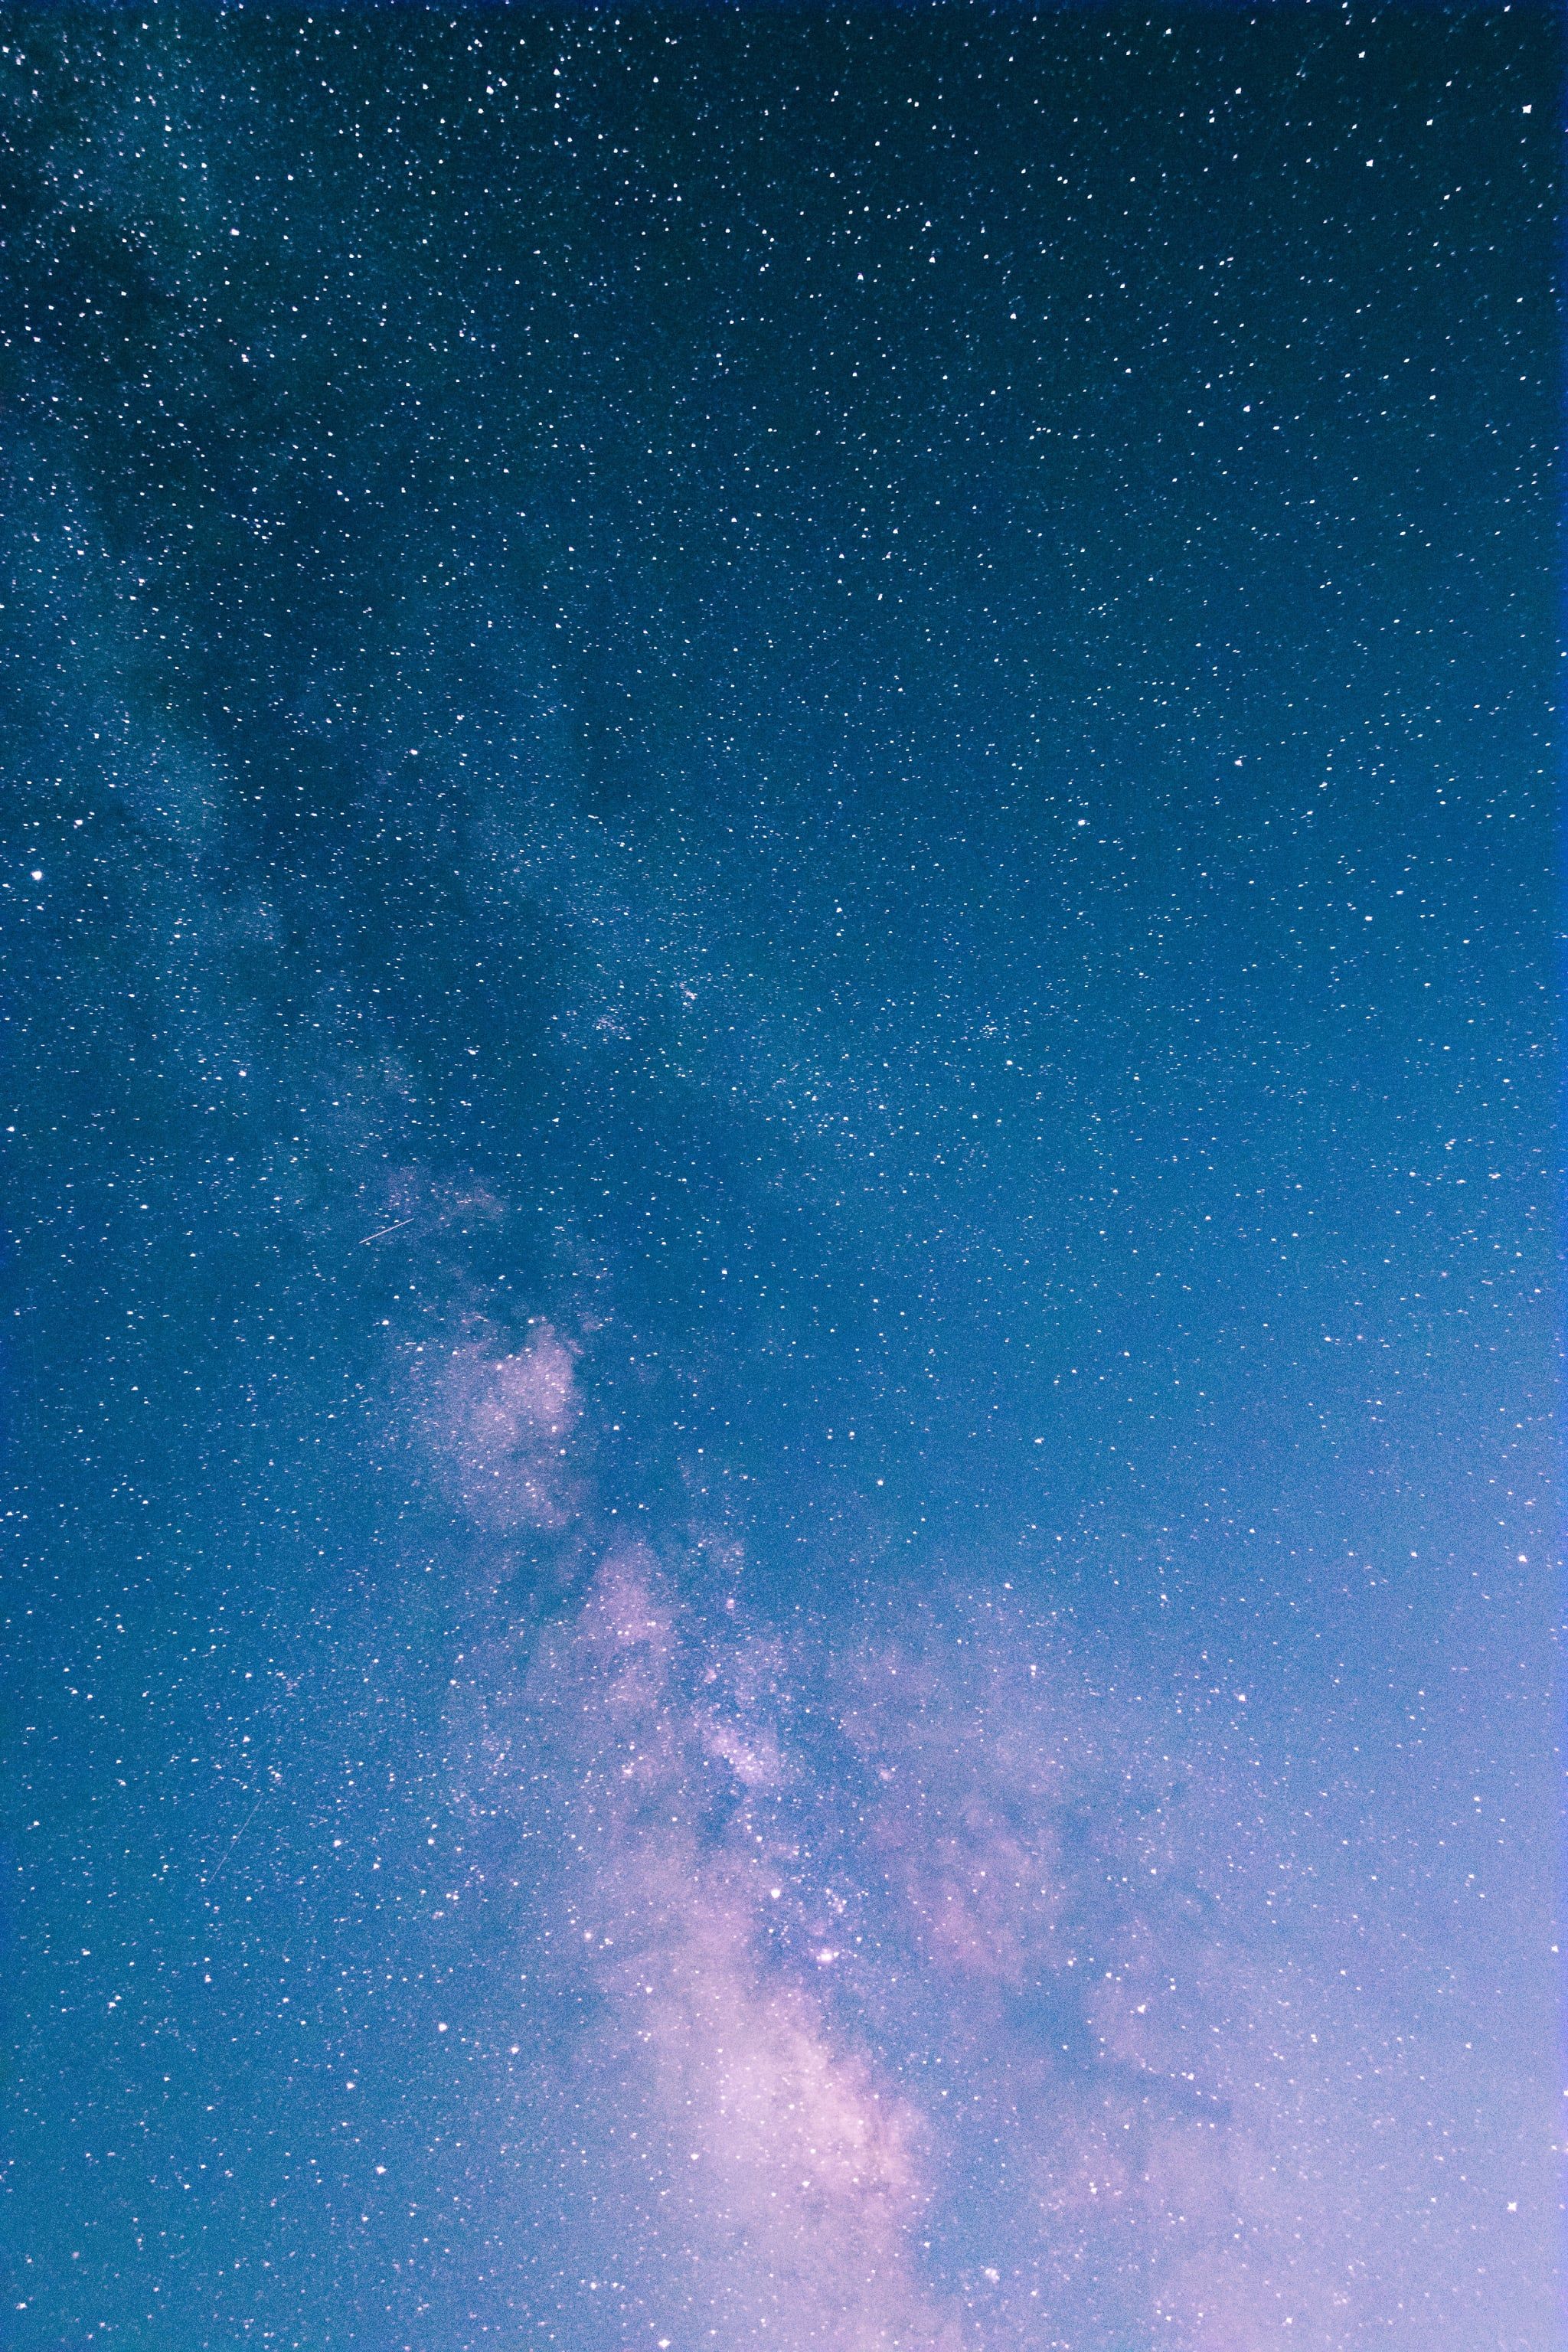 Best IOS 14 Wallpaper Ideas For Your Home Screen Aesthetic